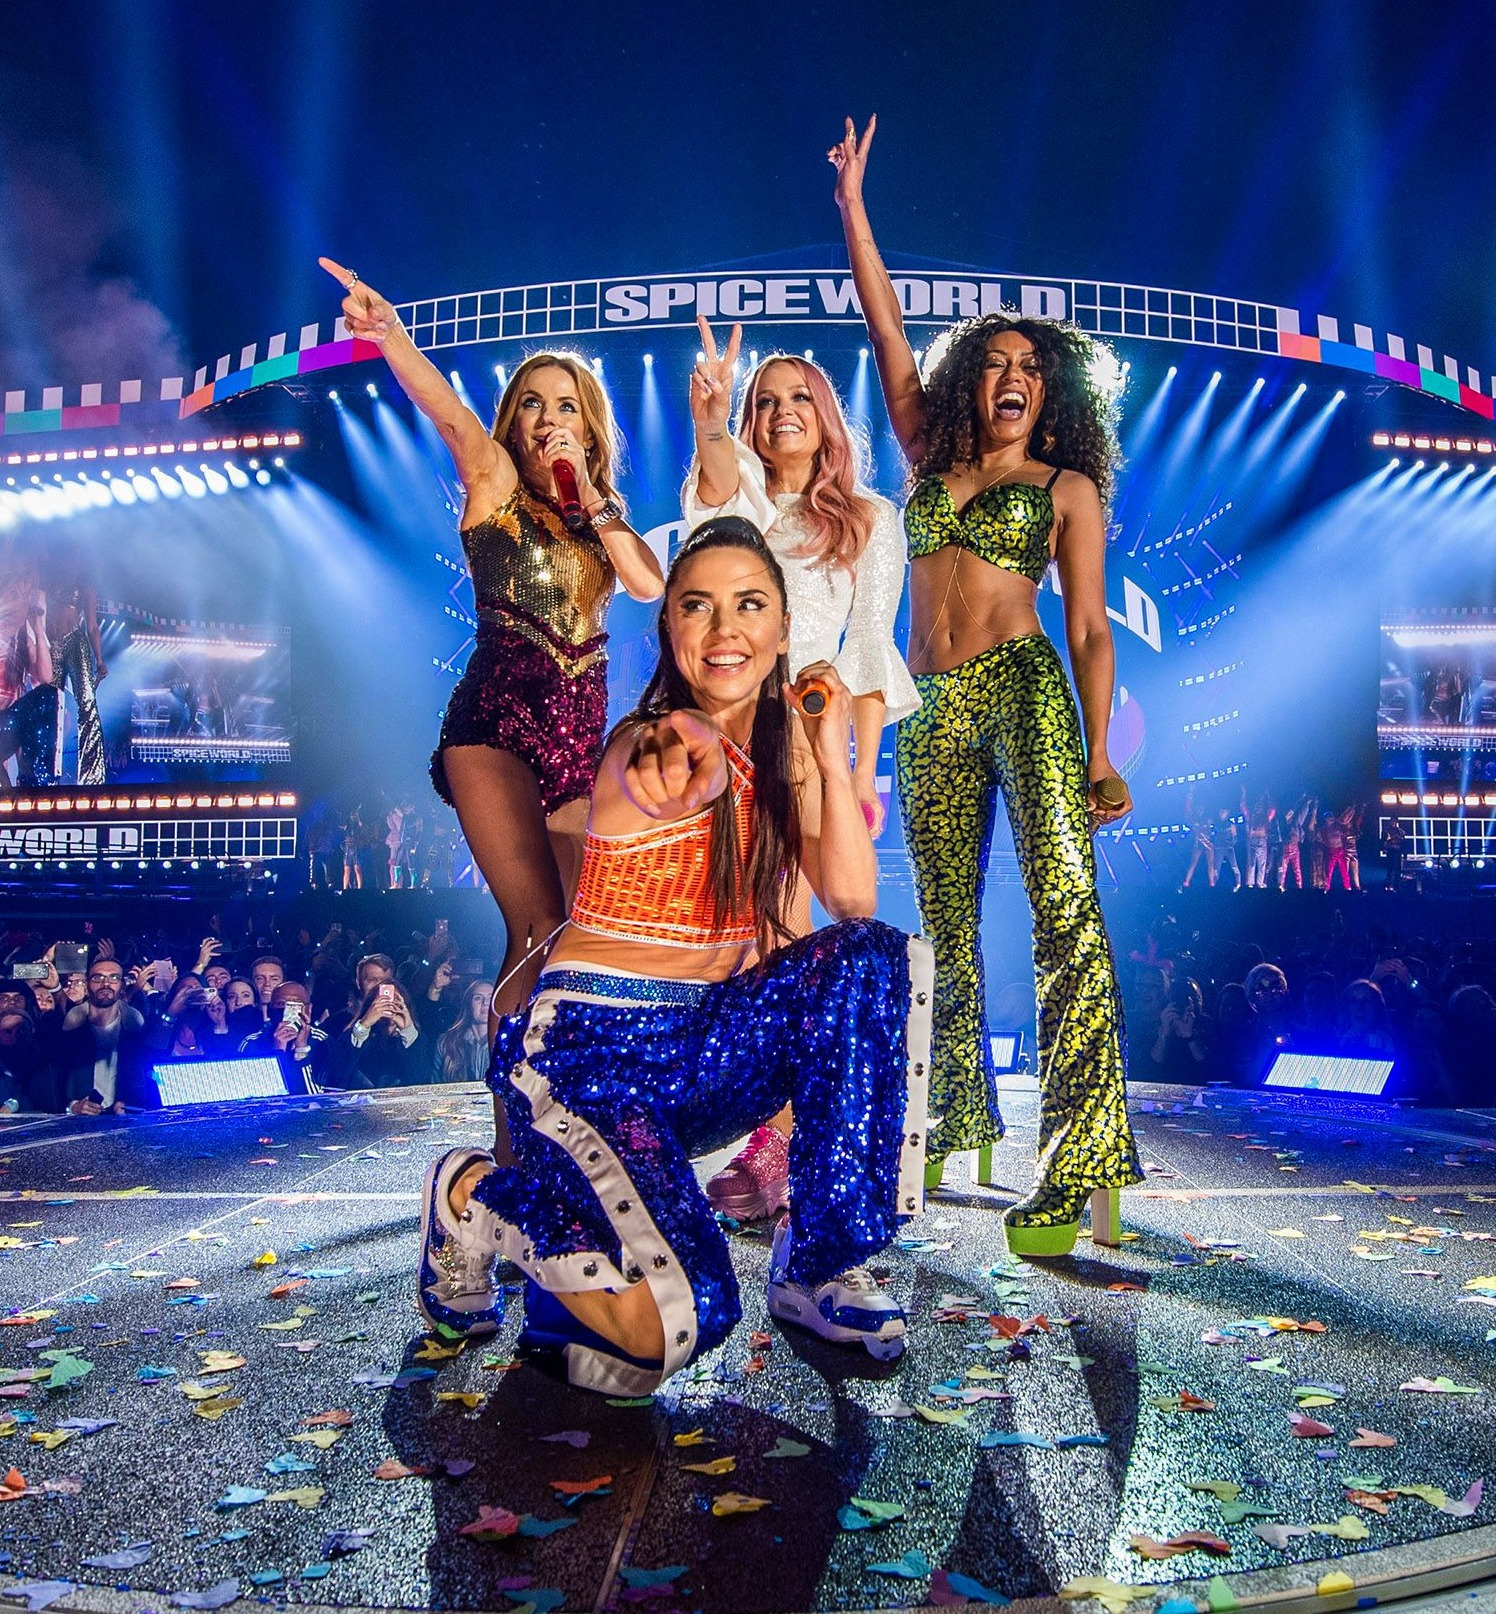 The Spice Girls will mark their 25th anniversary with a huge world tour in 2021